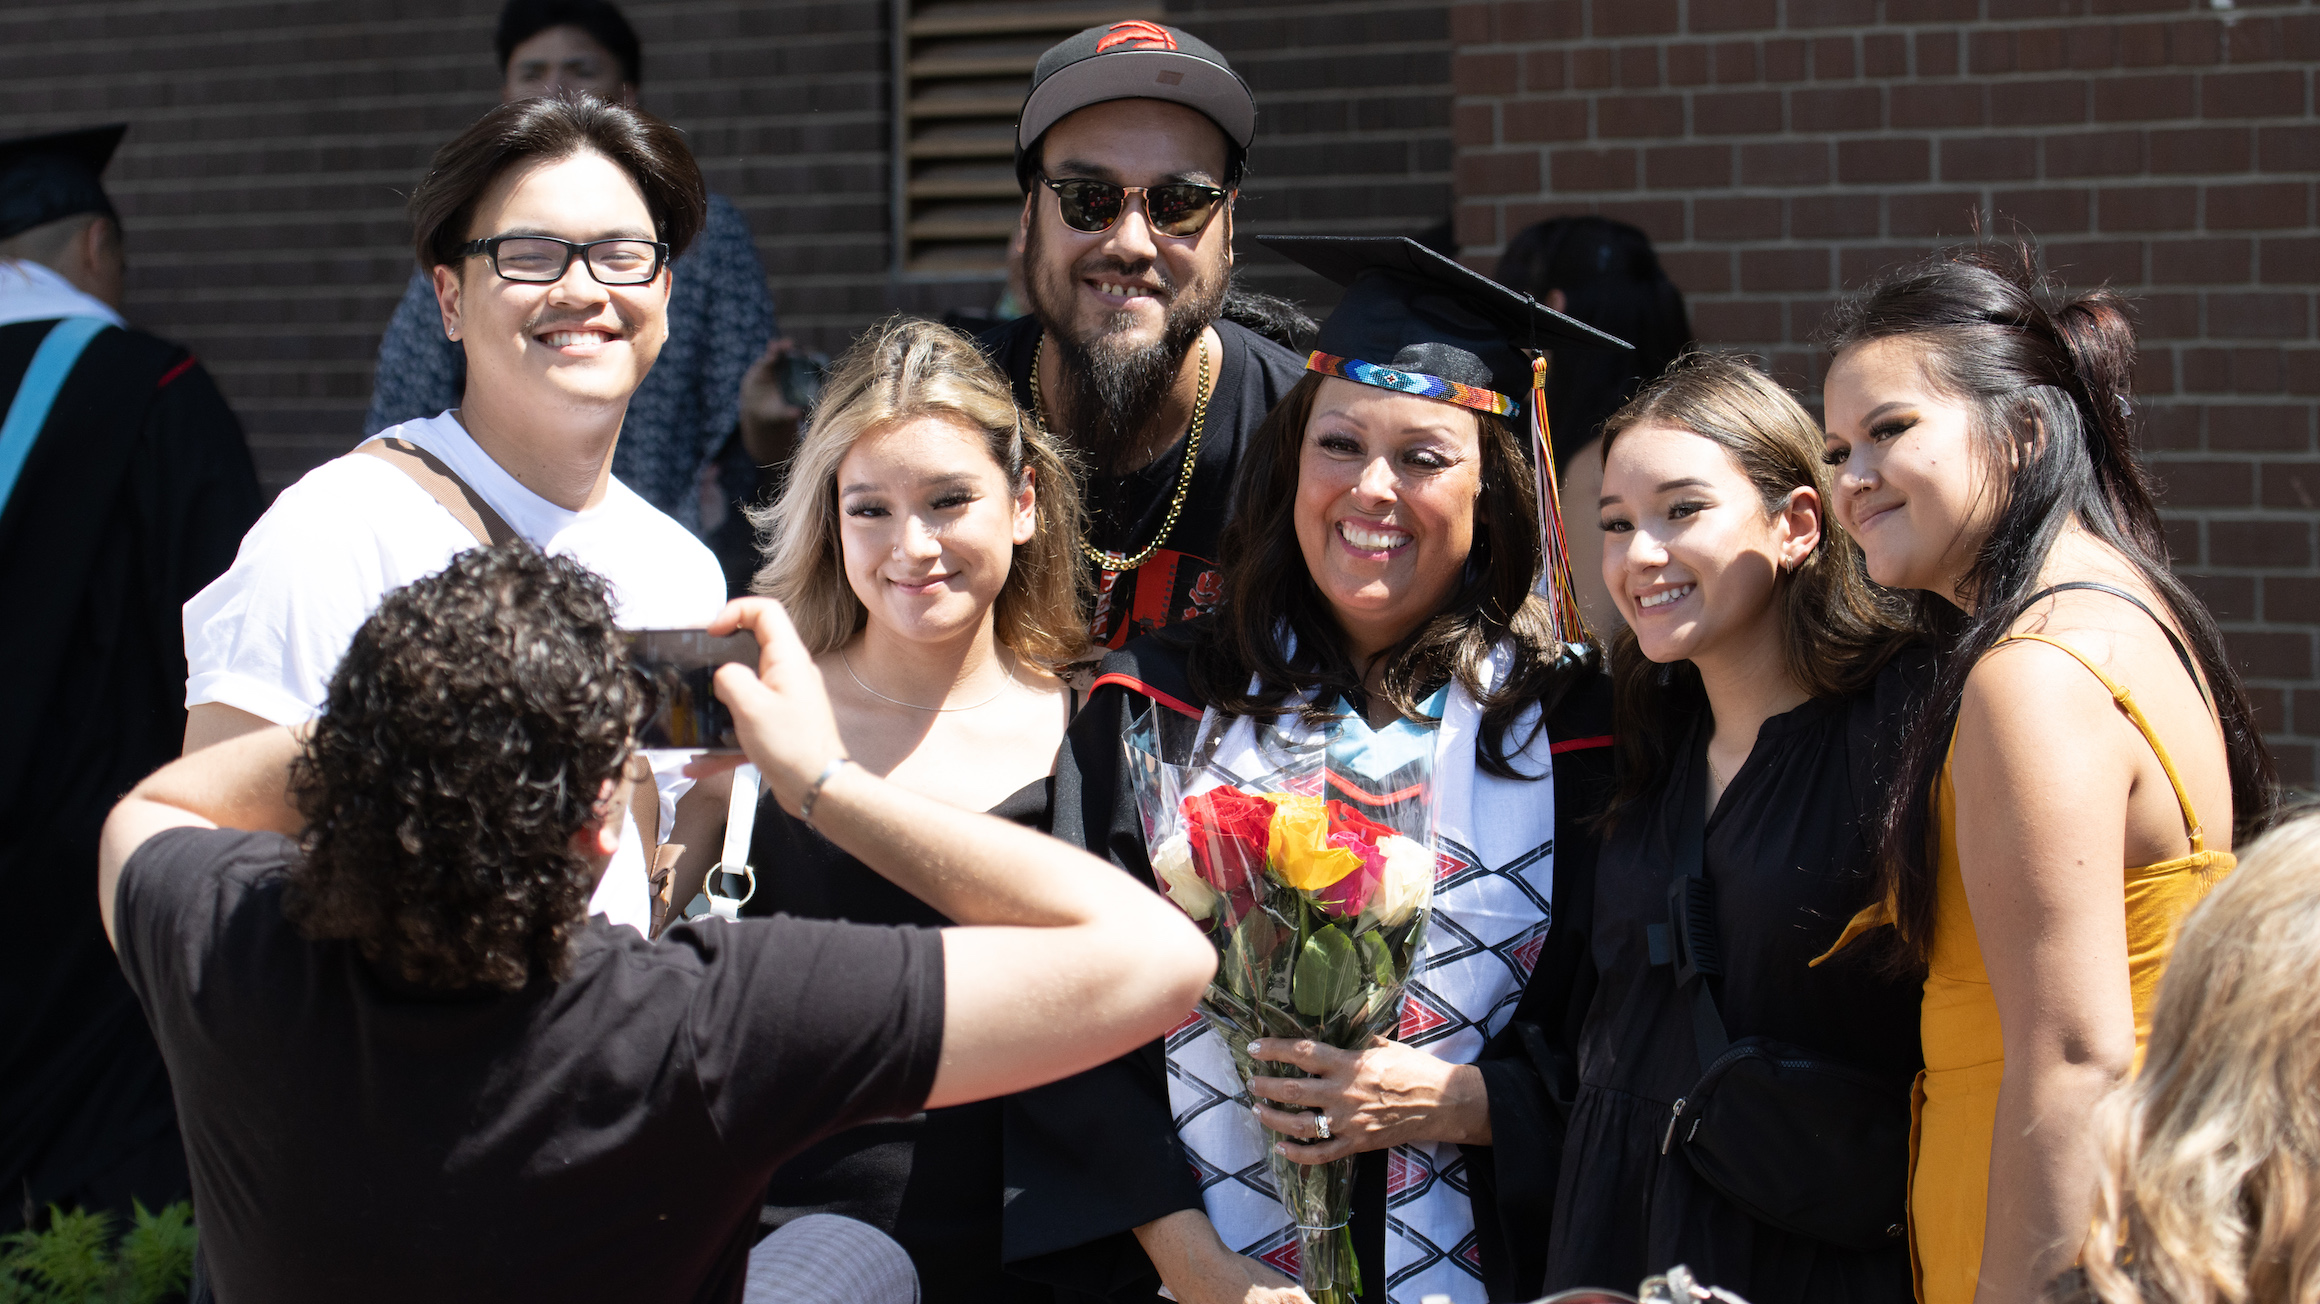 A graduate poses for a photo with friends and family after Convocation.